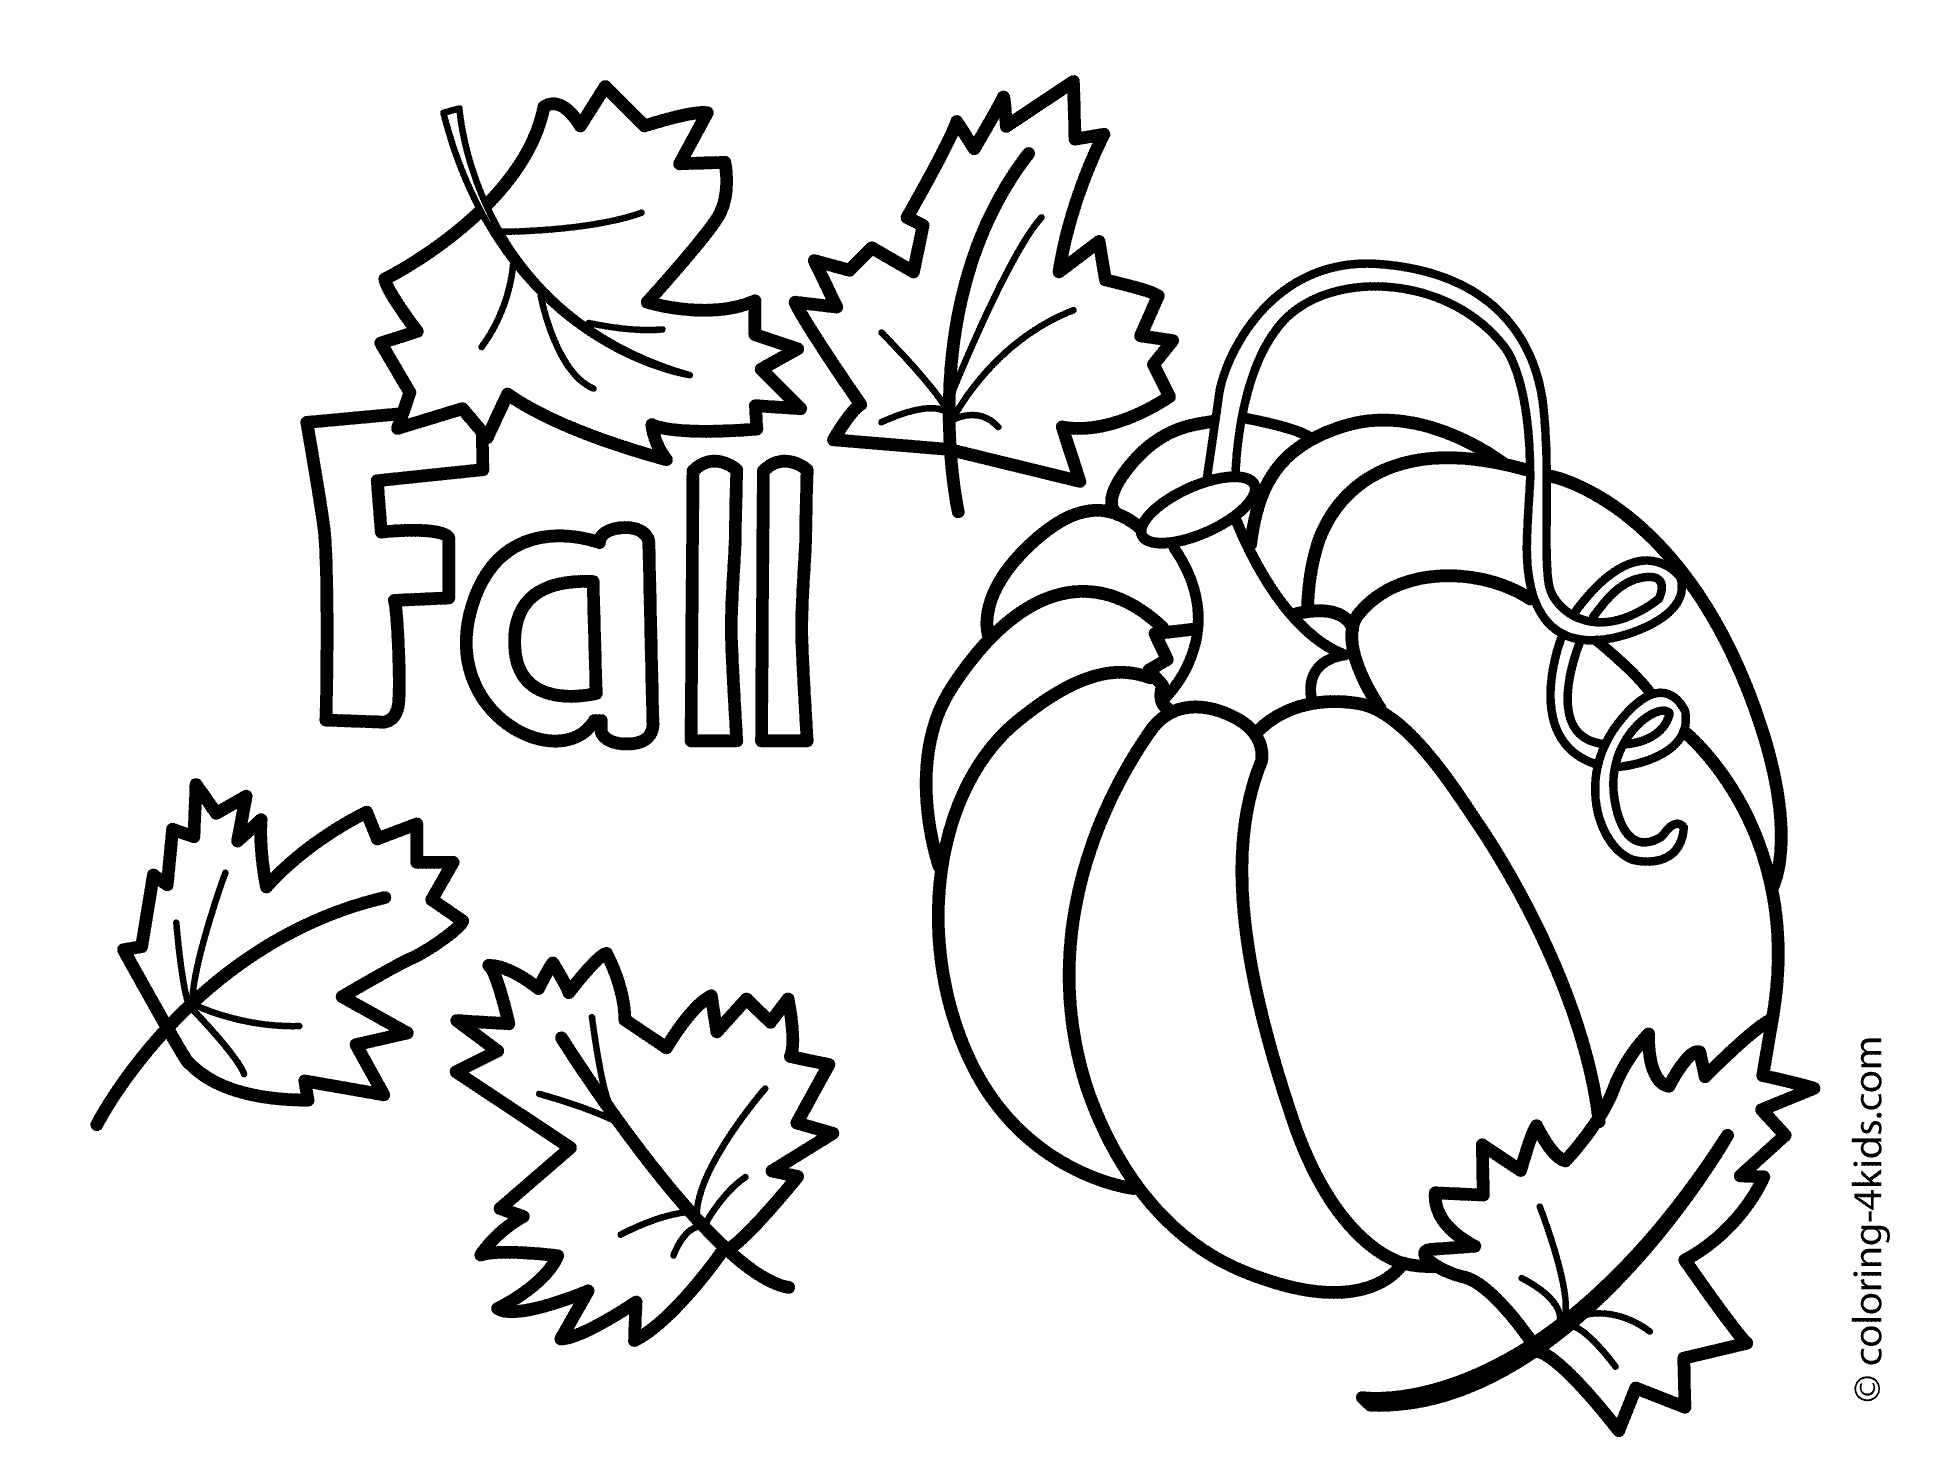 Autumn coloring pages with pumpkin for kids seasons coloring pages printable free fall leaves coloring pages fall coloring pictures fall coloring pages